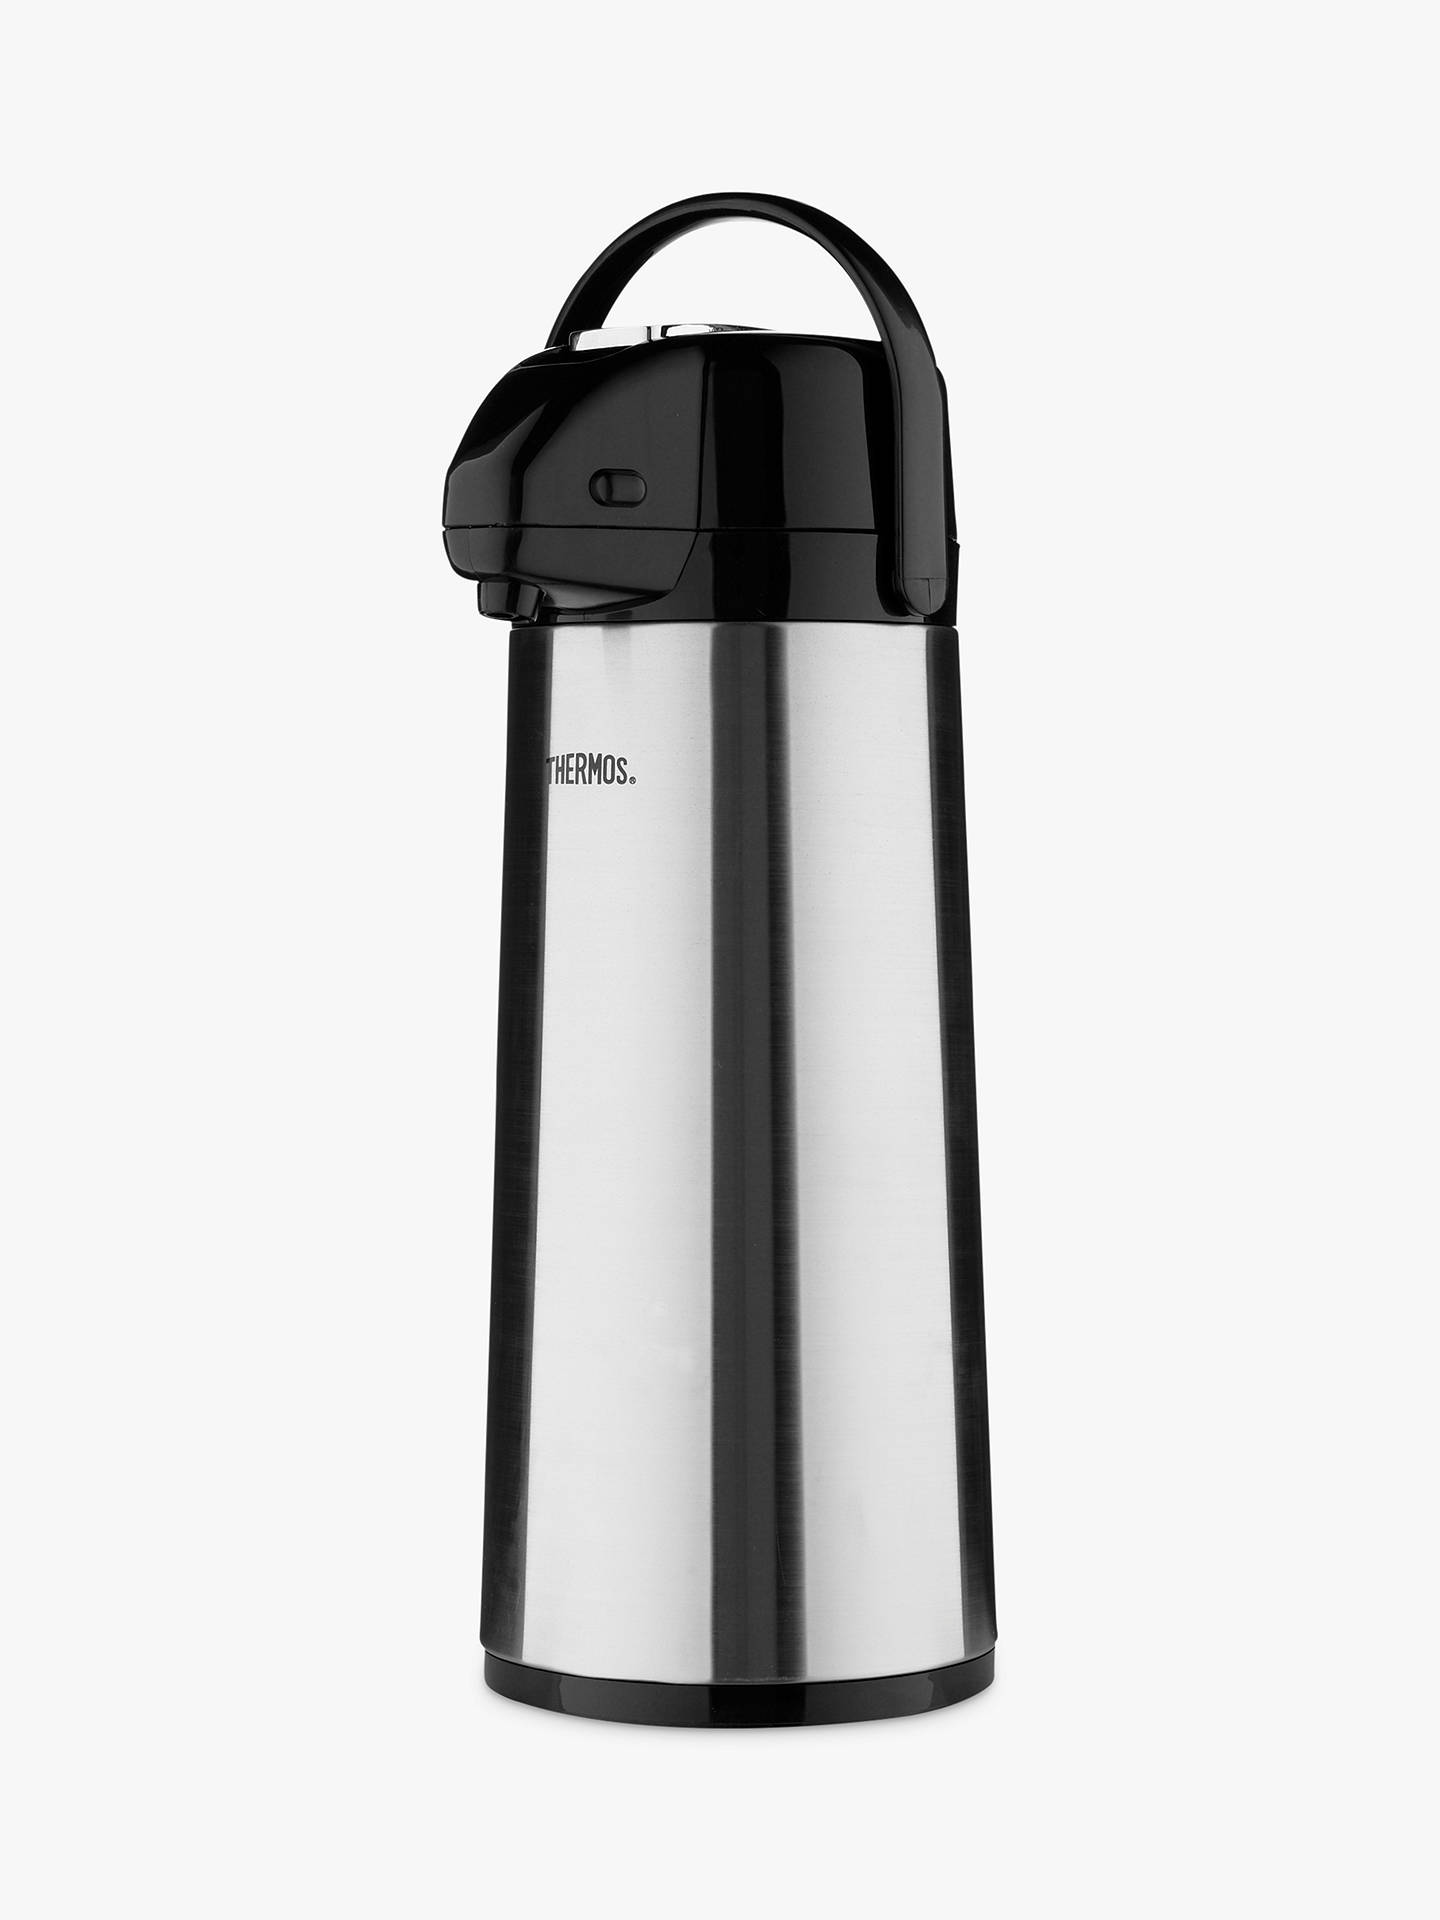 Thermos Lever Action Pump Pot, 2.5L, Stainless Steel at John Lewis ...